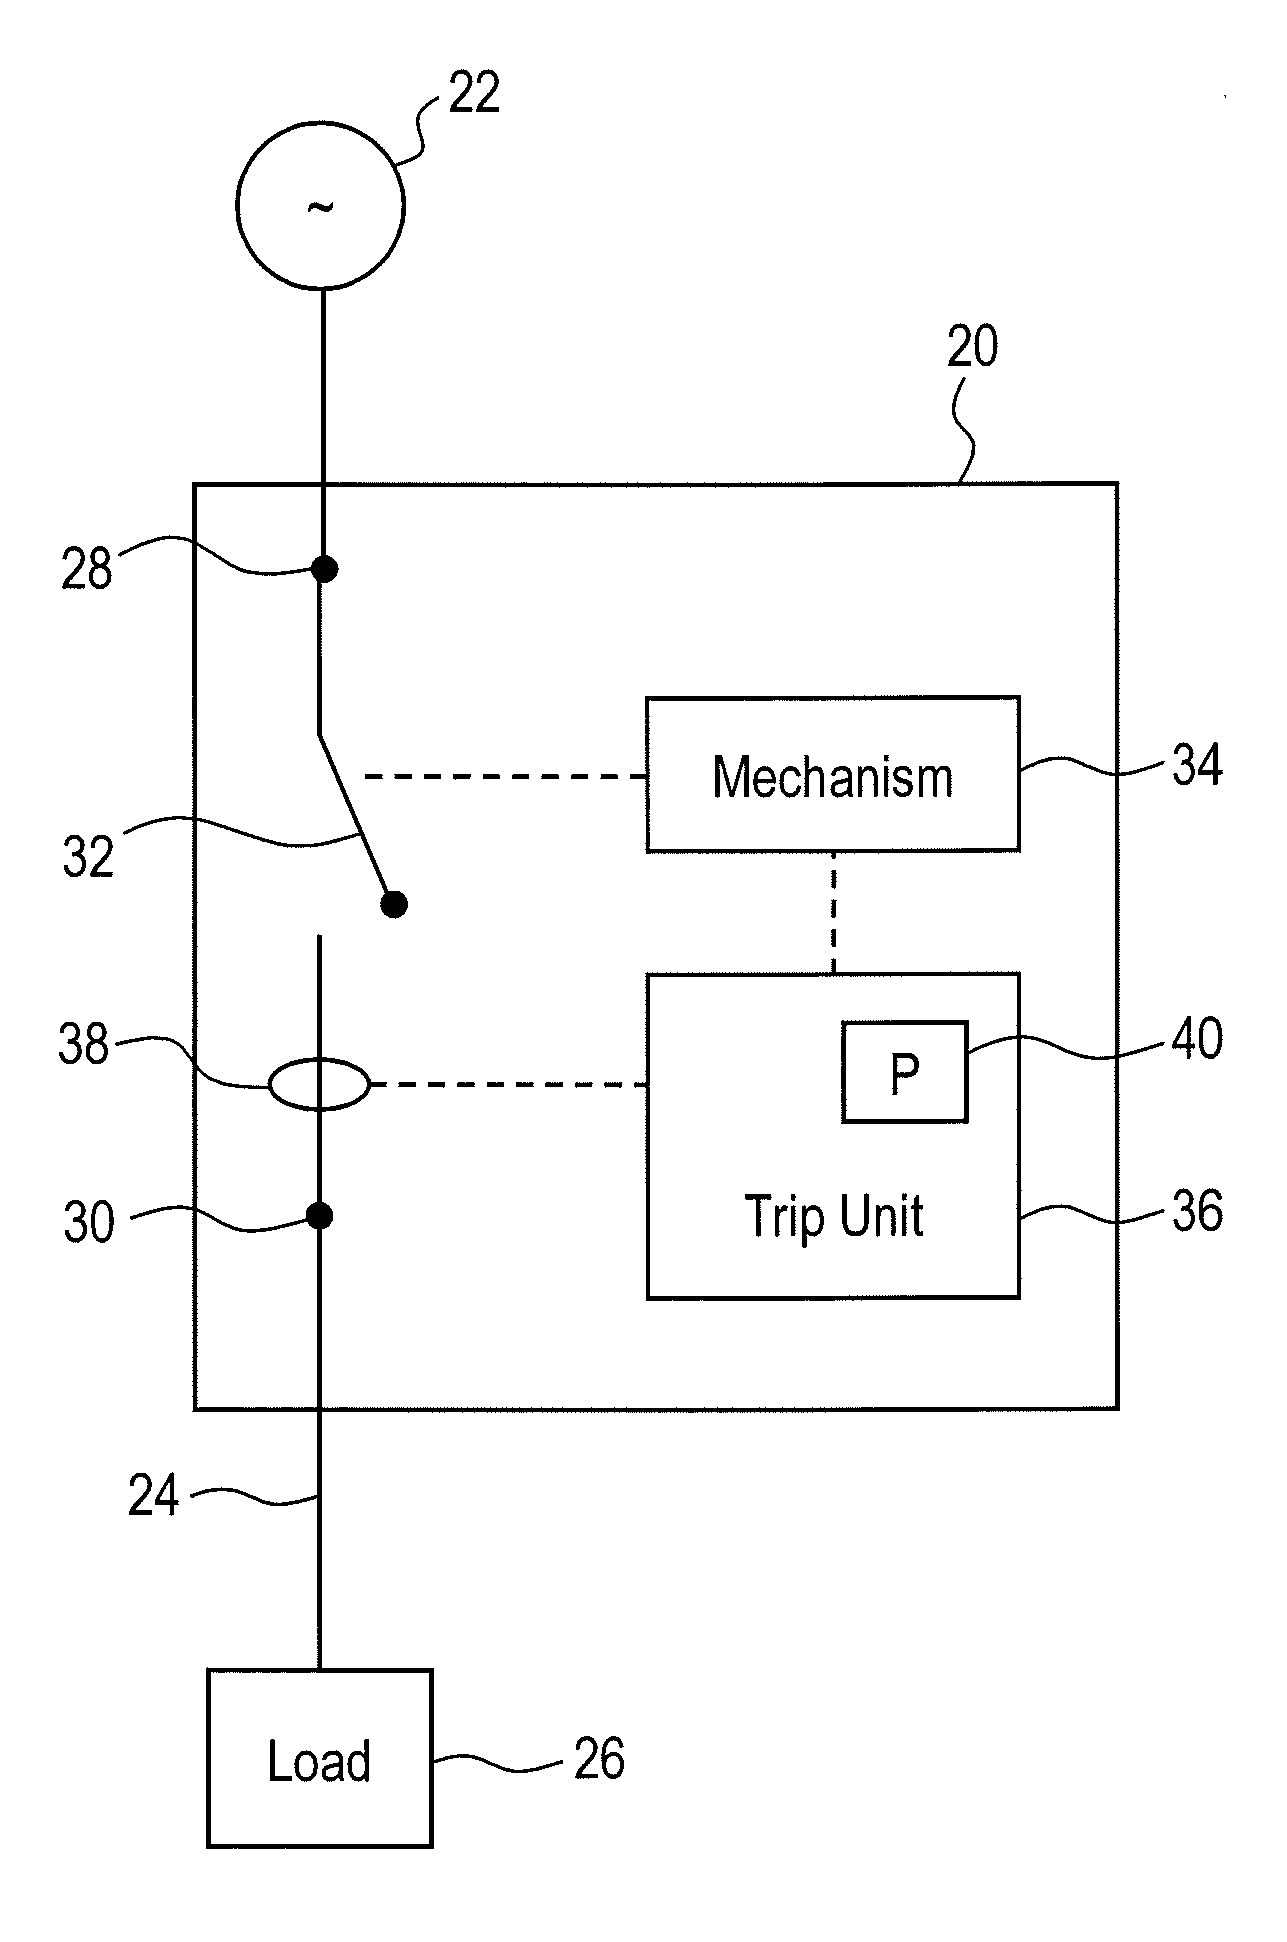 Circuit breaker with arc fault detection and method of operation